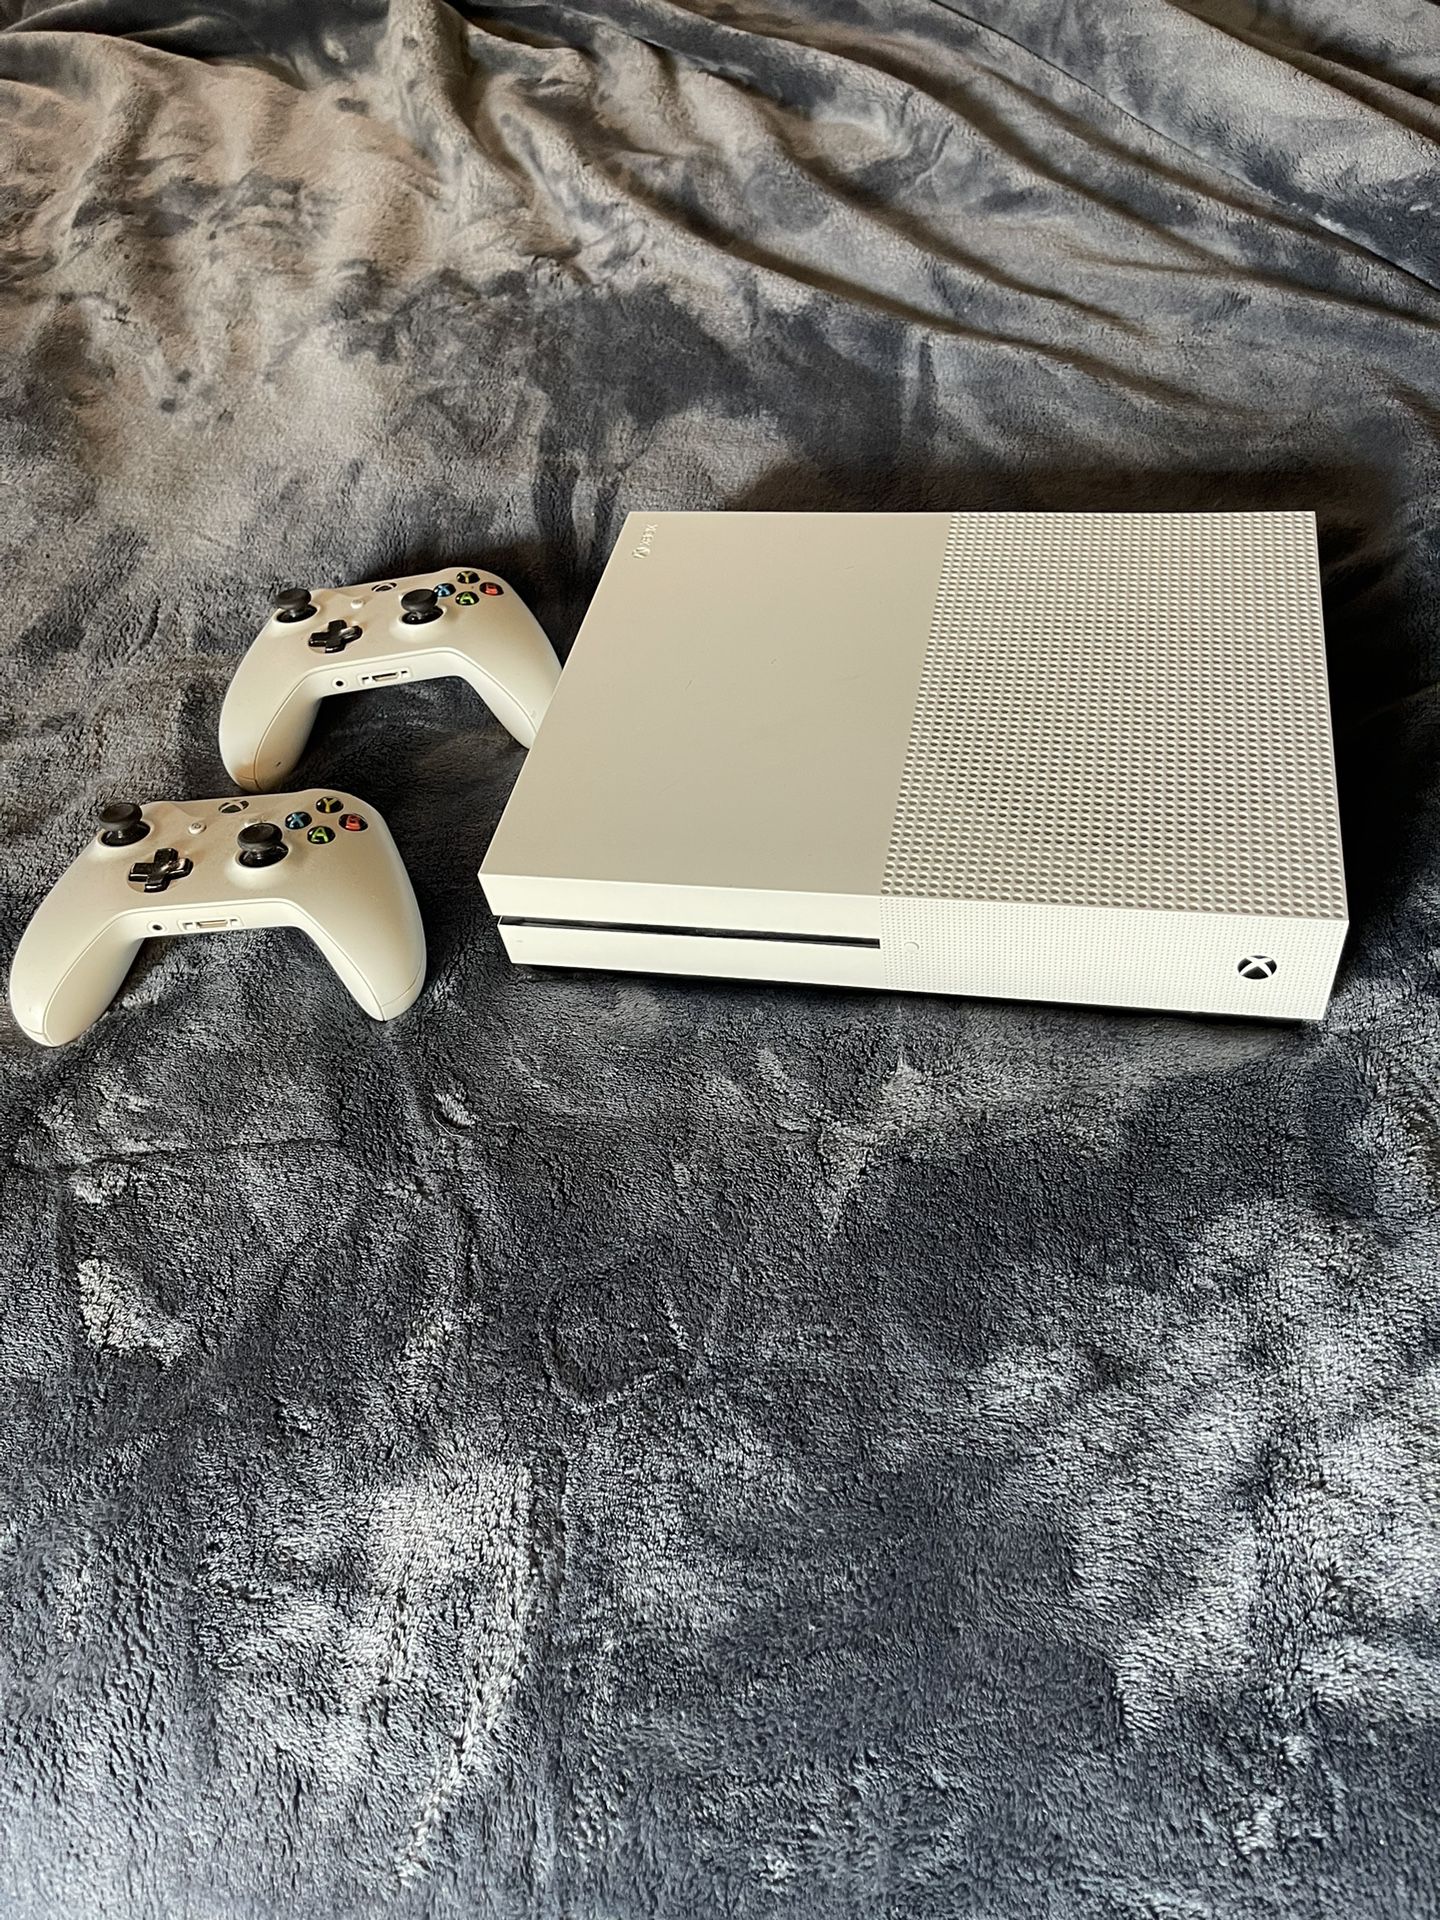 Xbox One S With 2(two) Controllers